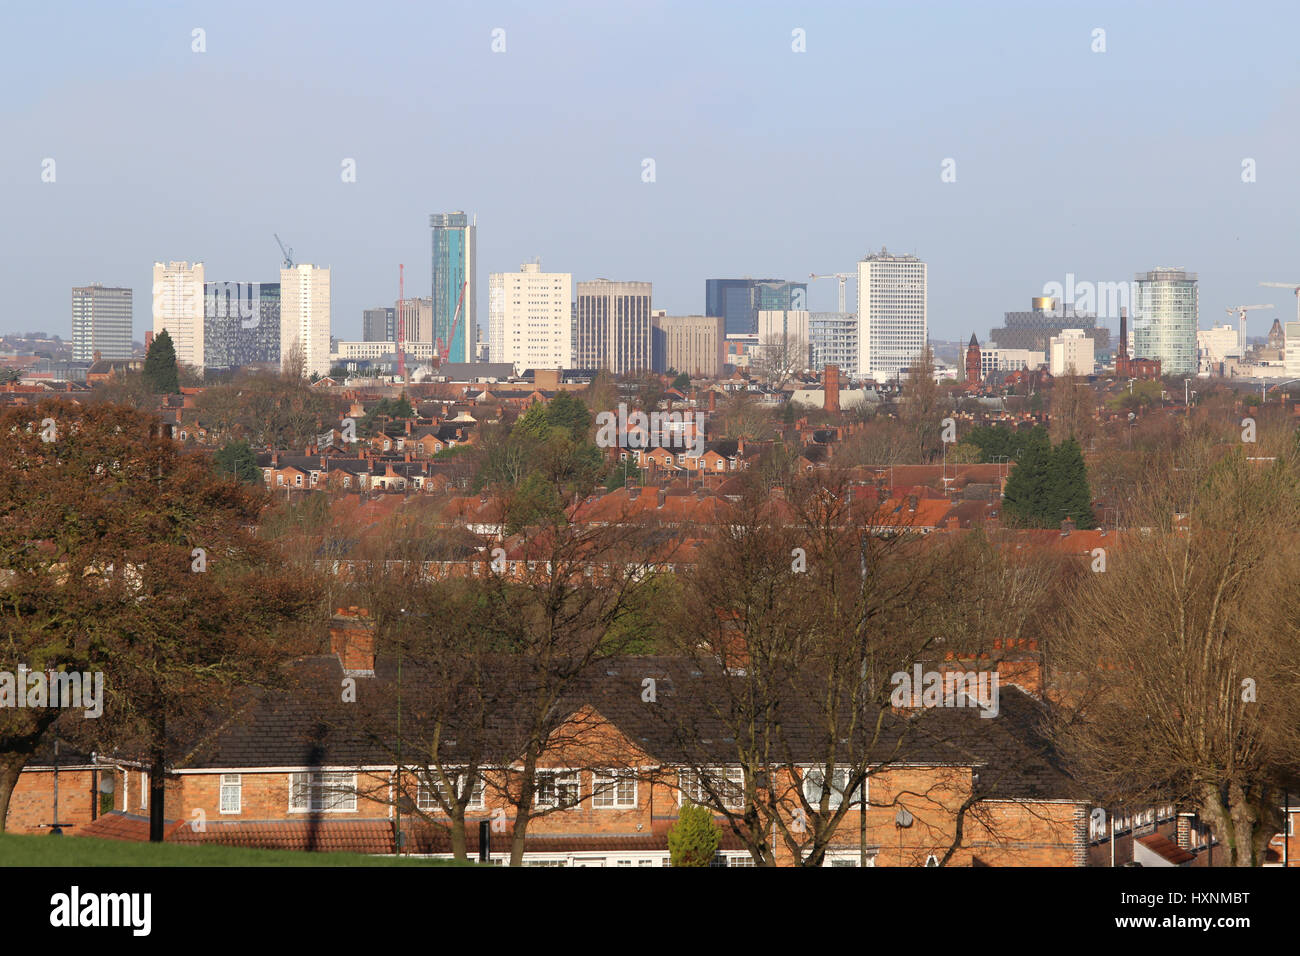 An early morning view of the skyline of Birmingham city centre, West Midlands, UK. Stock Photo